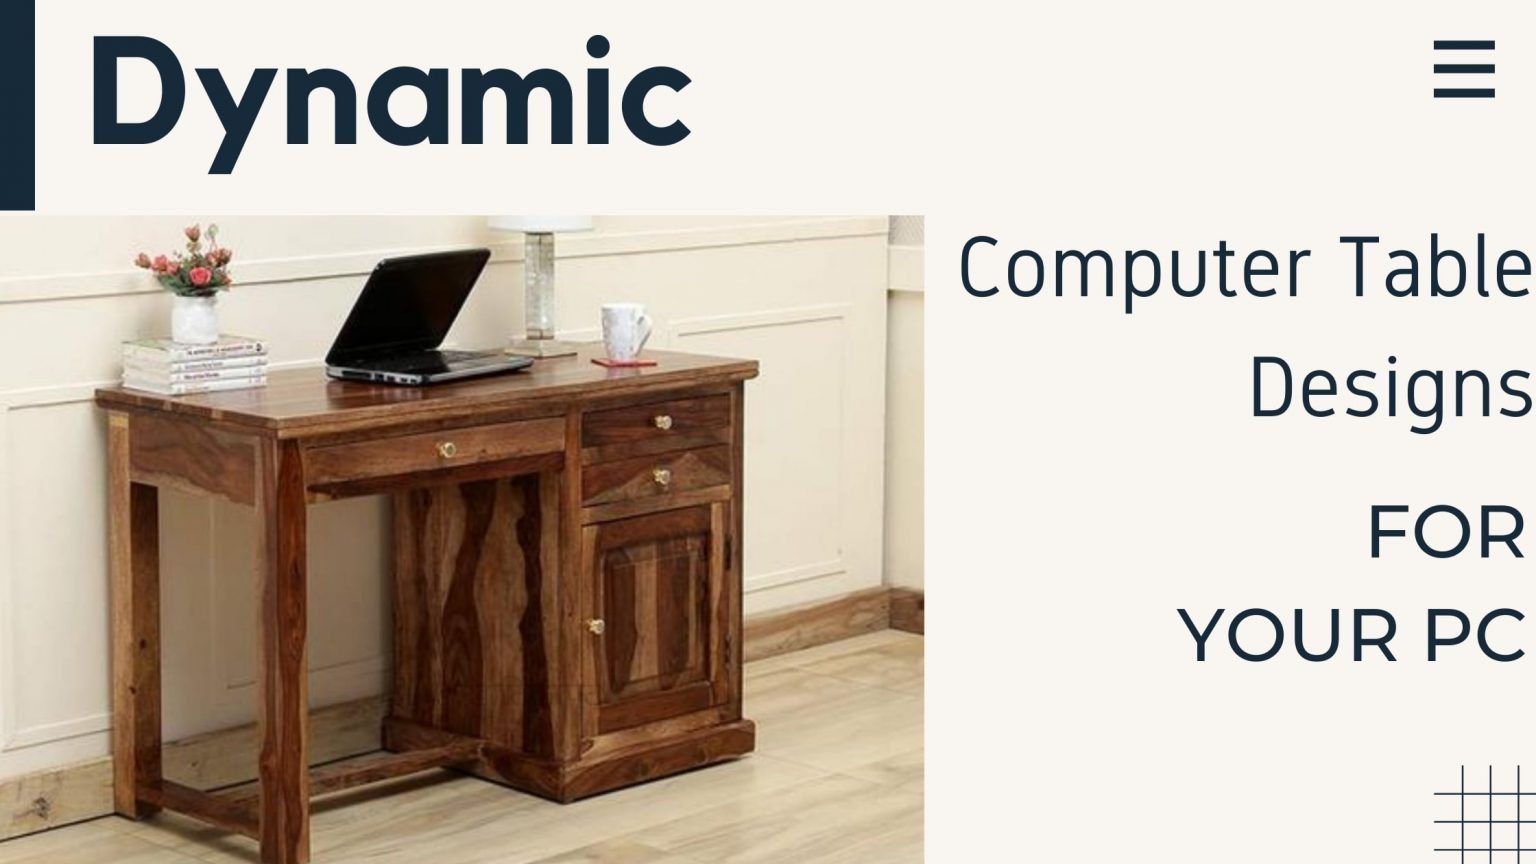 Dynamic Computer Table Designs for Your PC